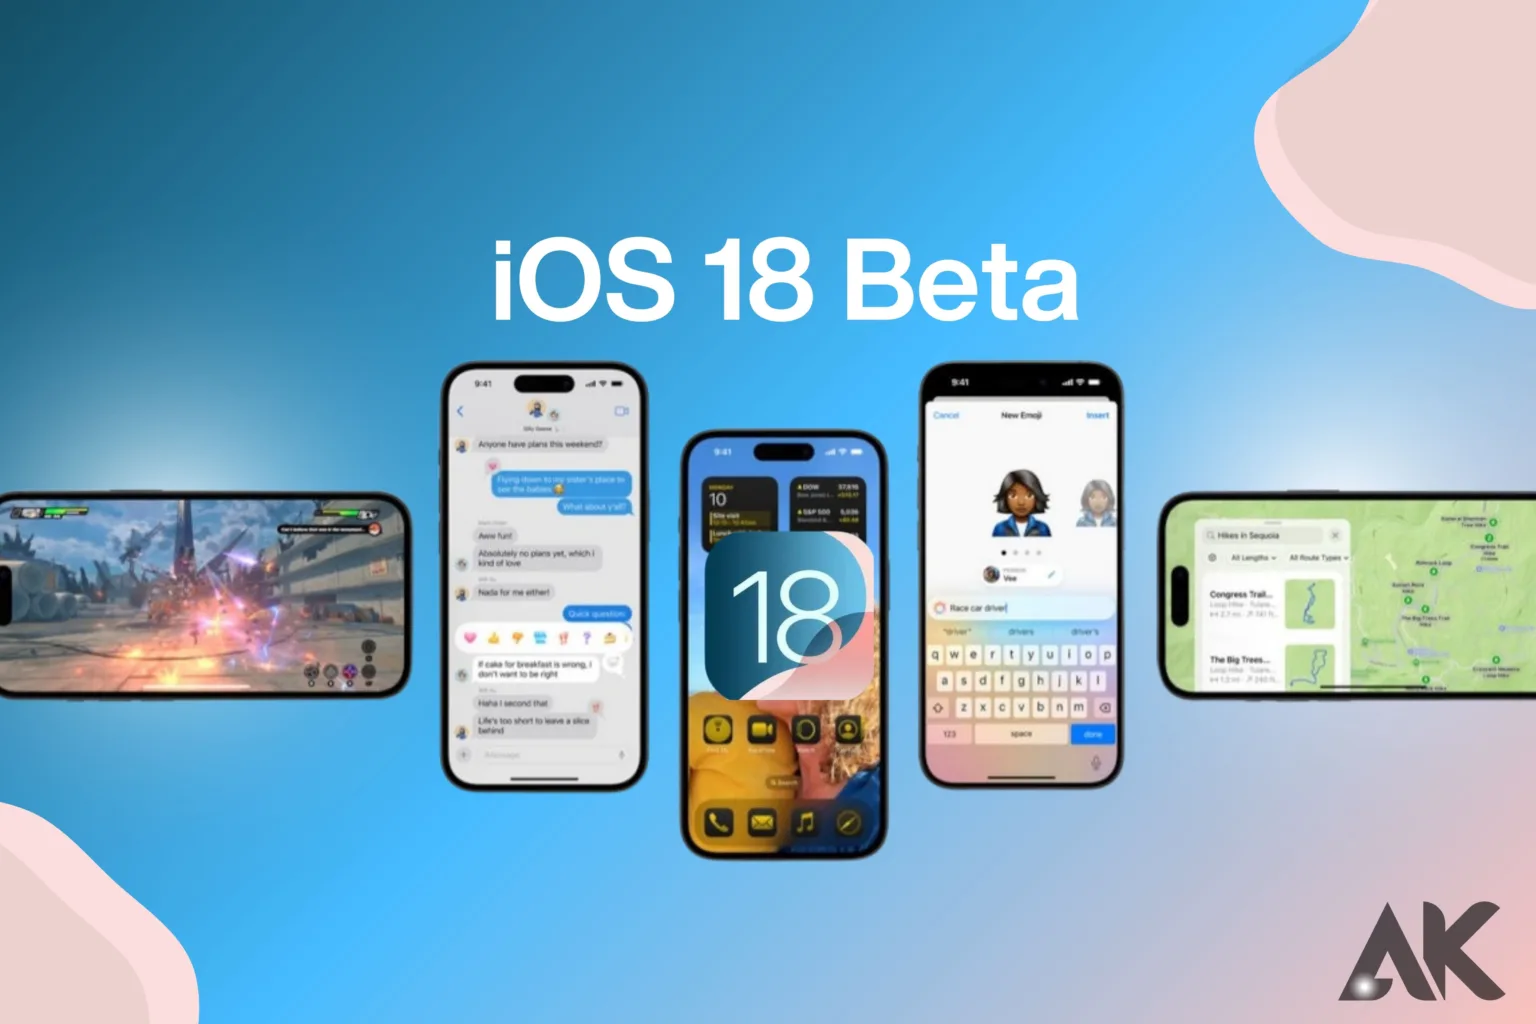 A Deep Dive into iOS 18 Beta’s Best Features